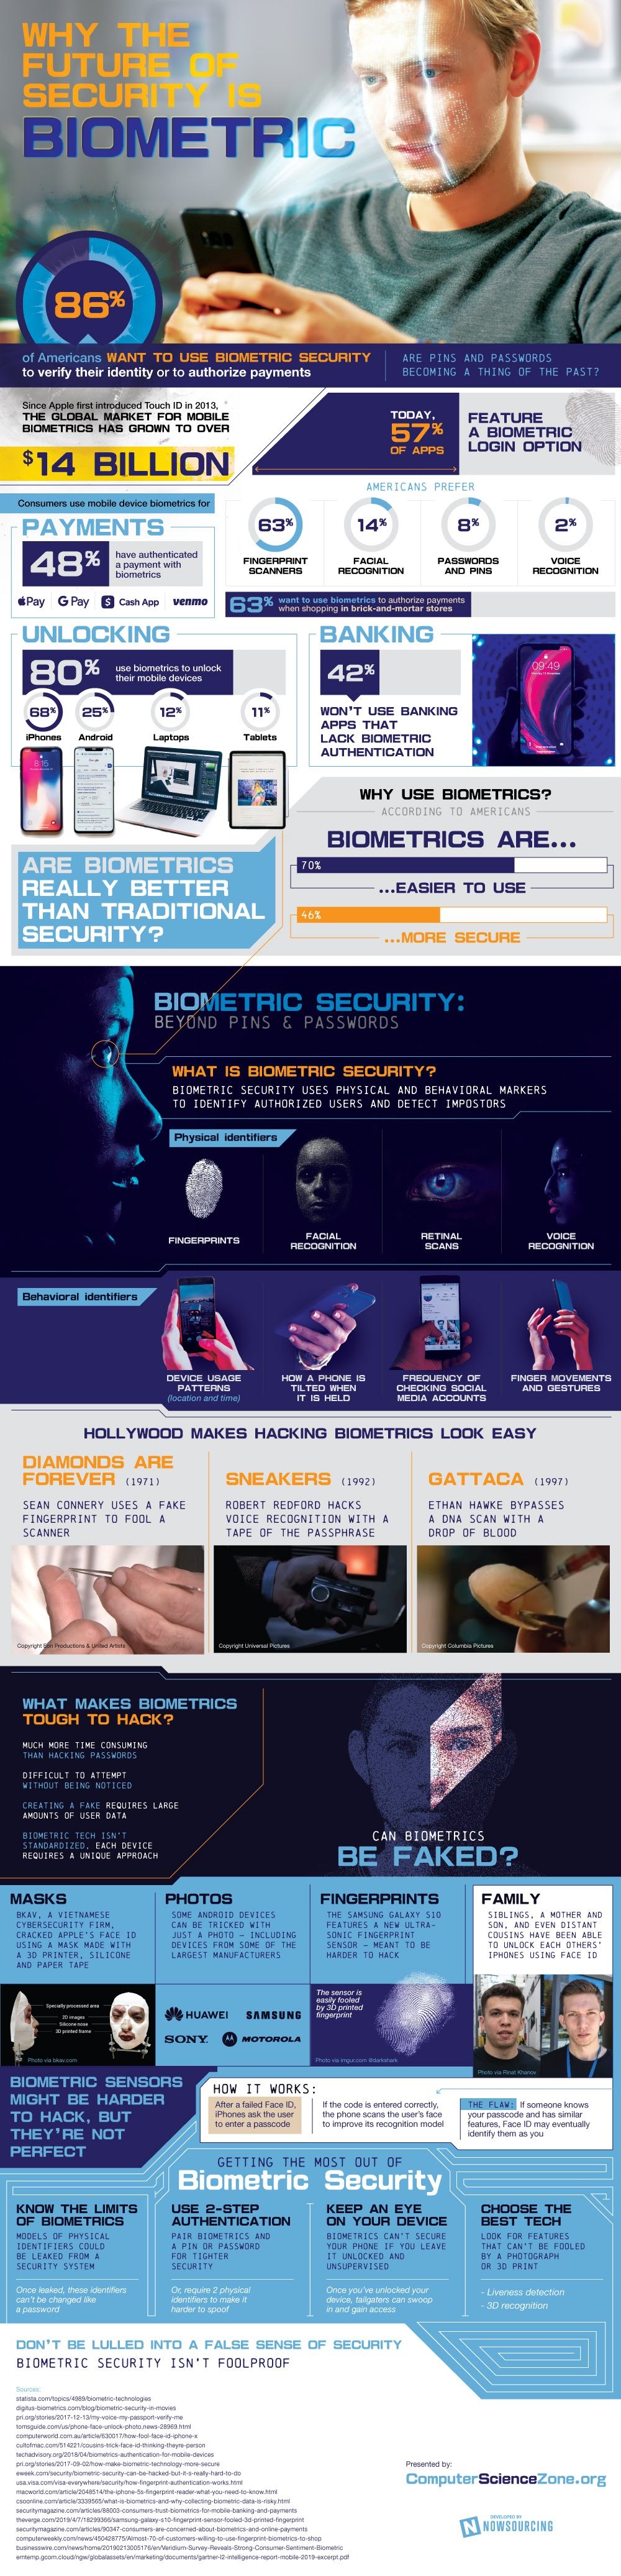 Why Biometric Security is the Future